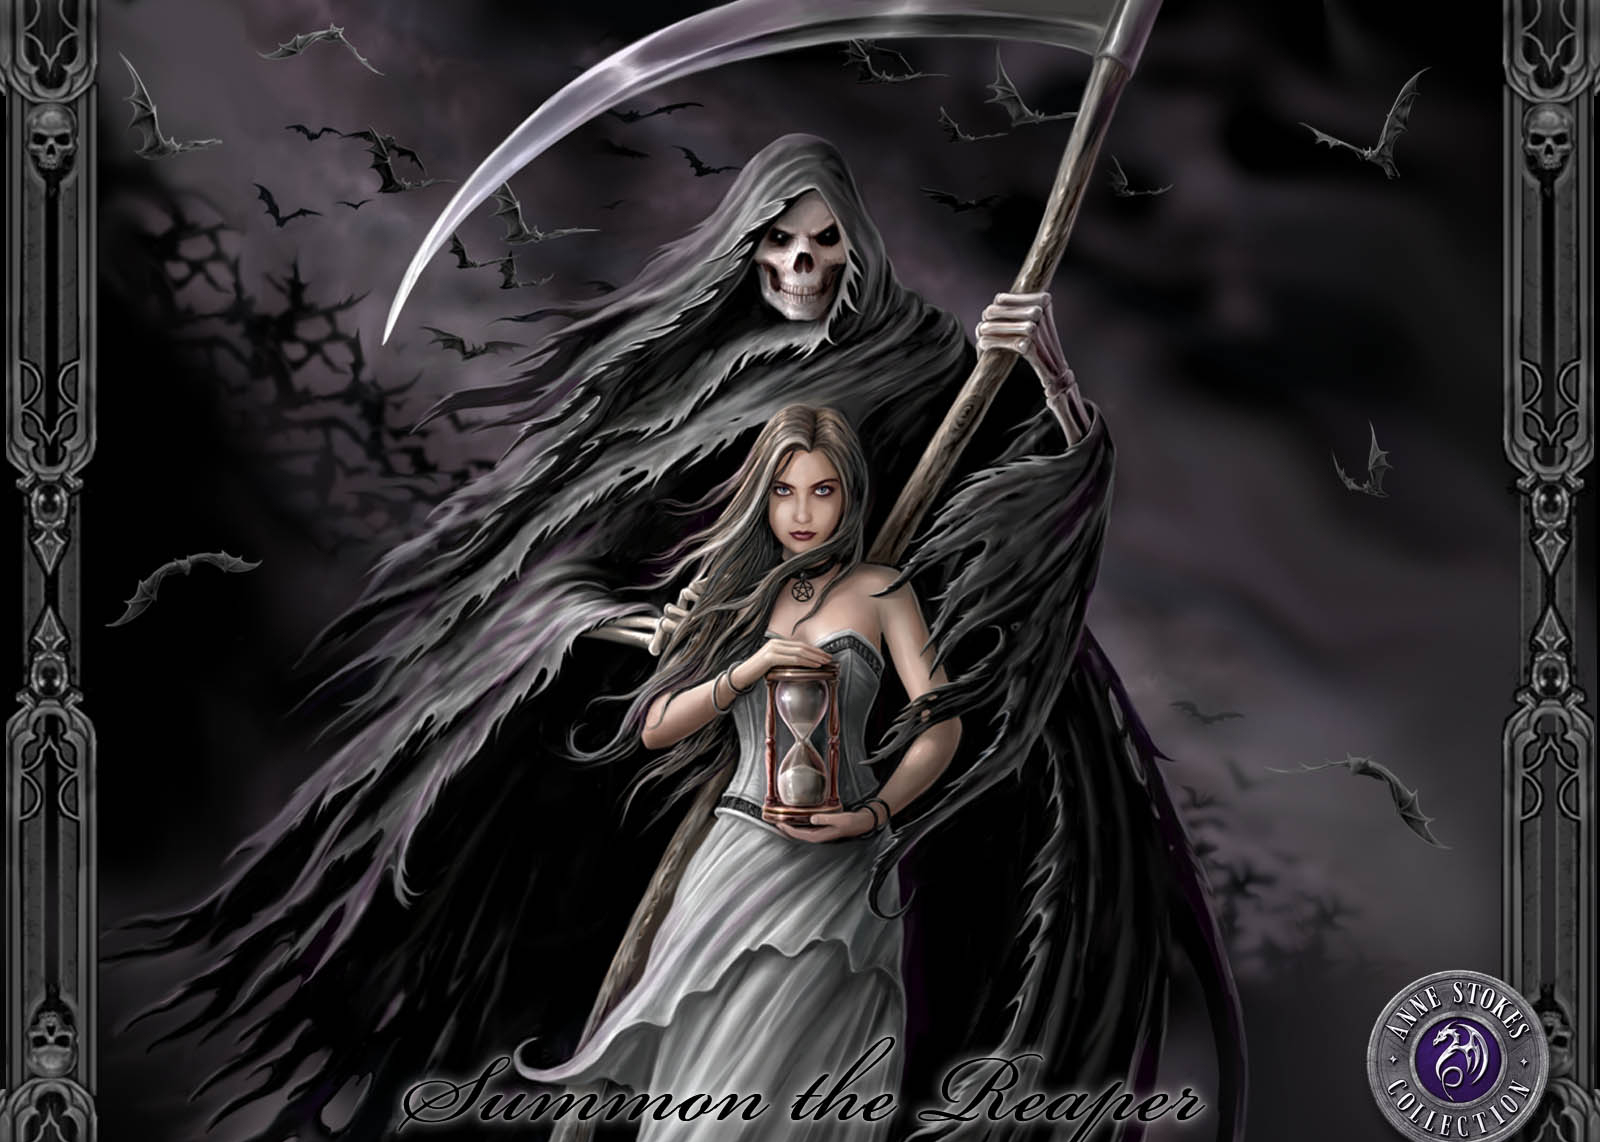 Time's Up by Anne Stokes